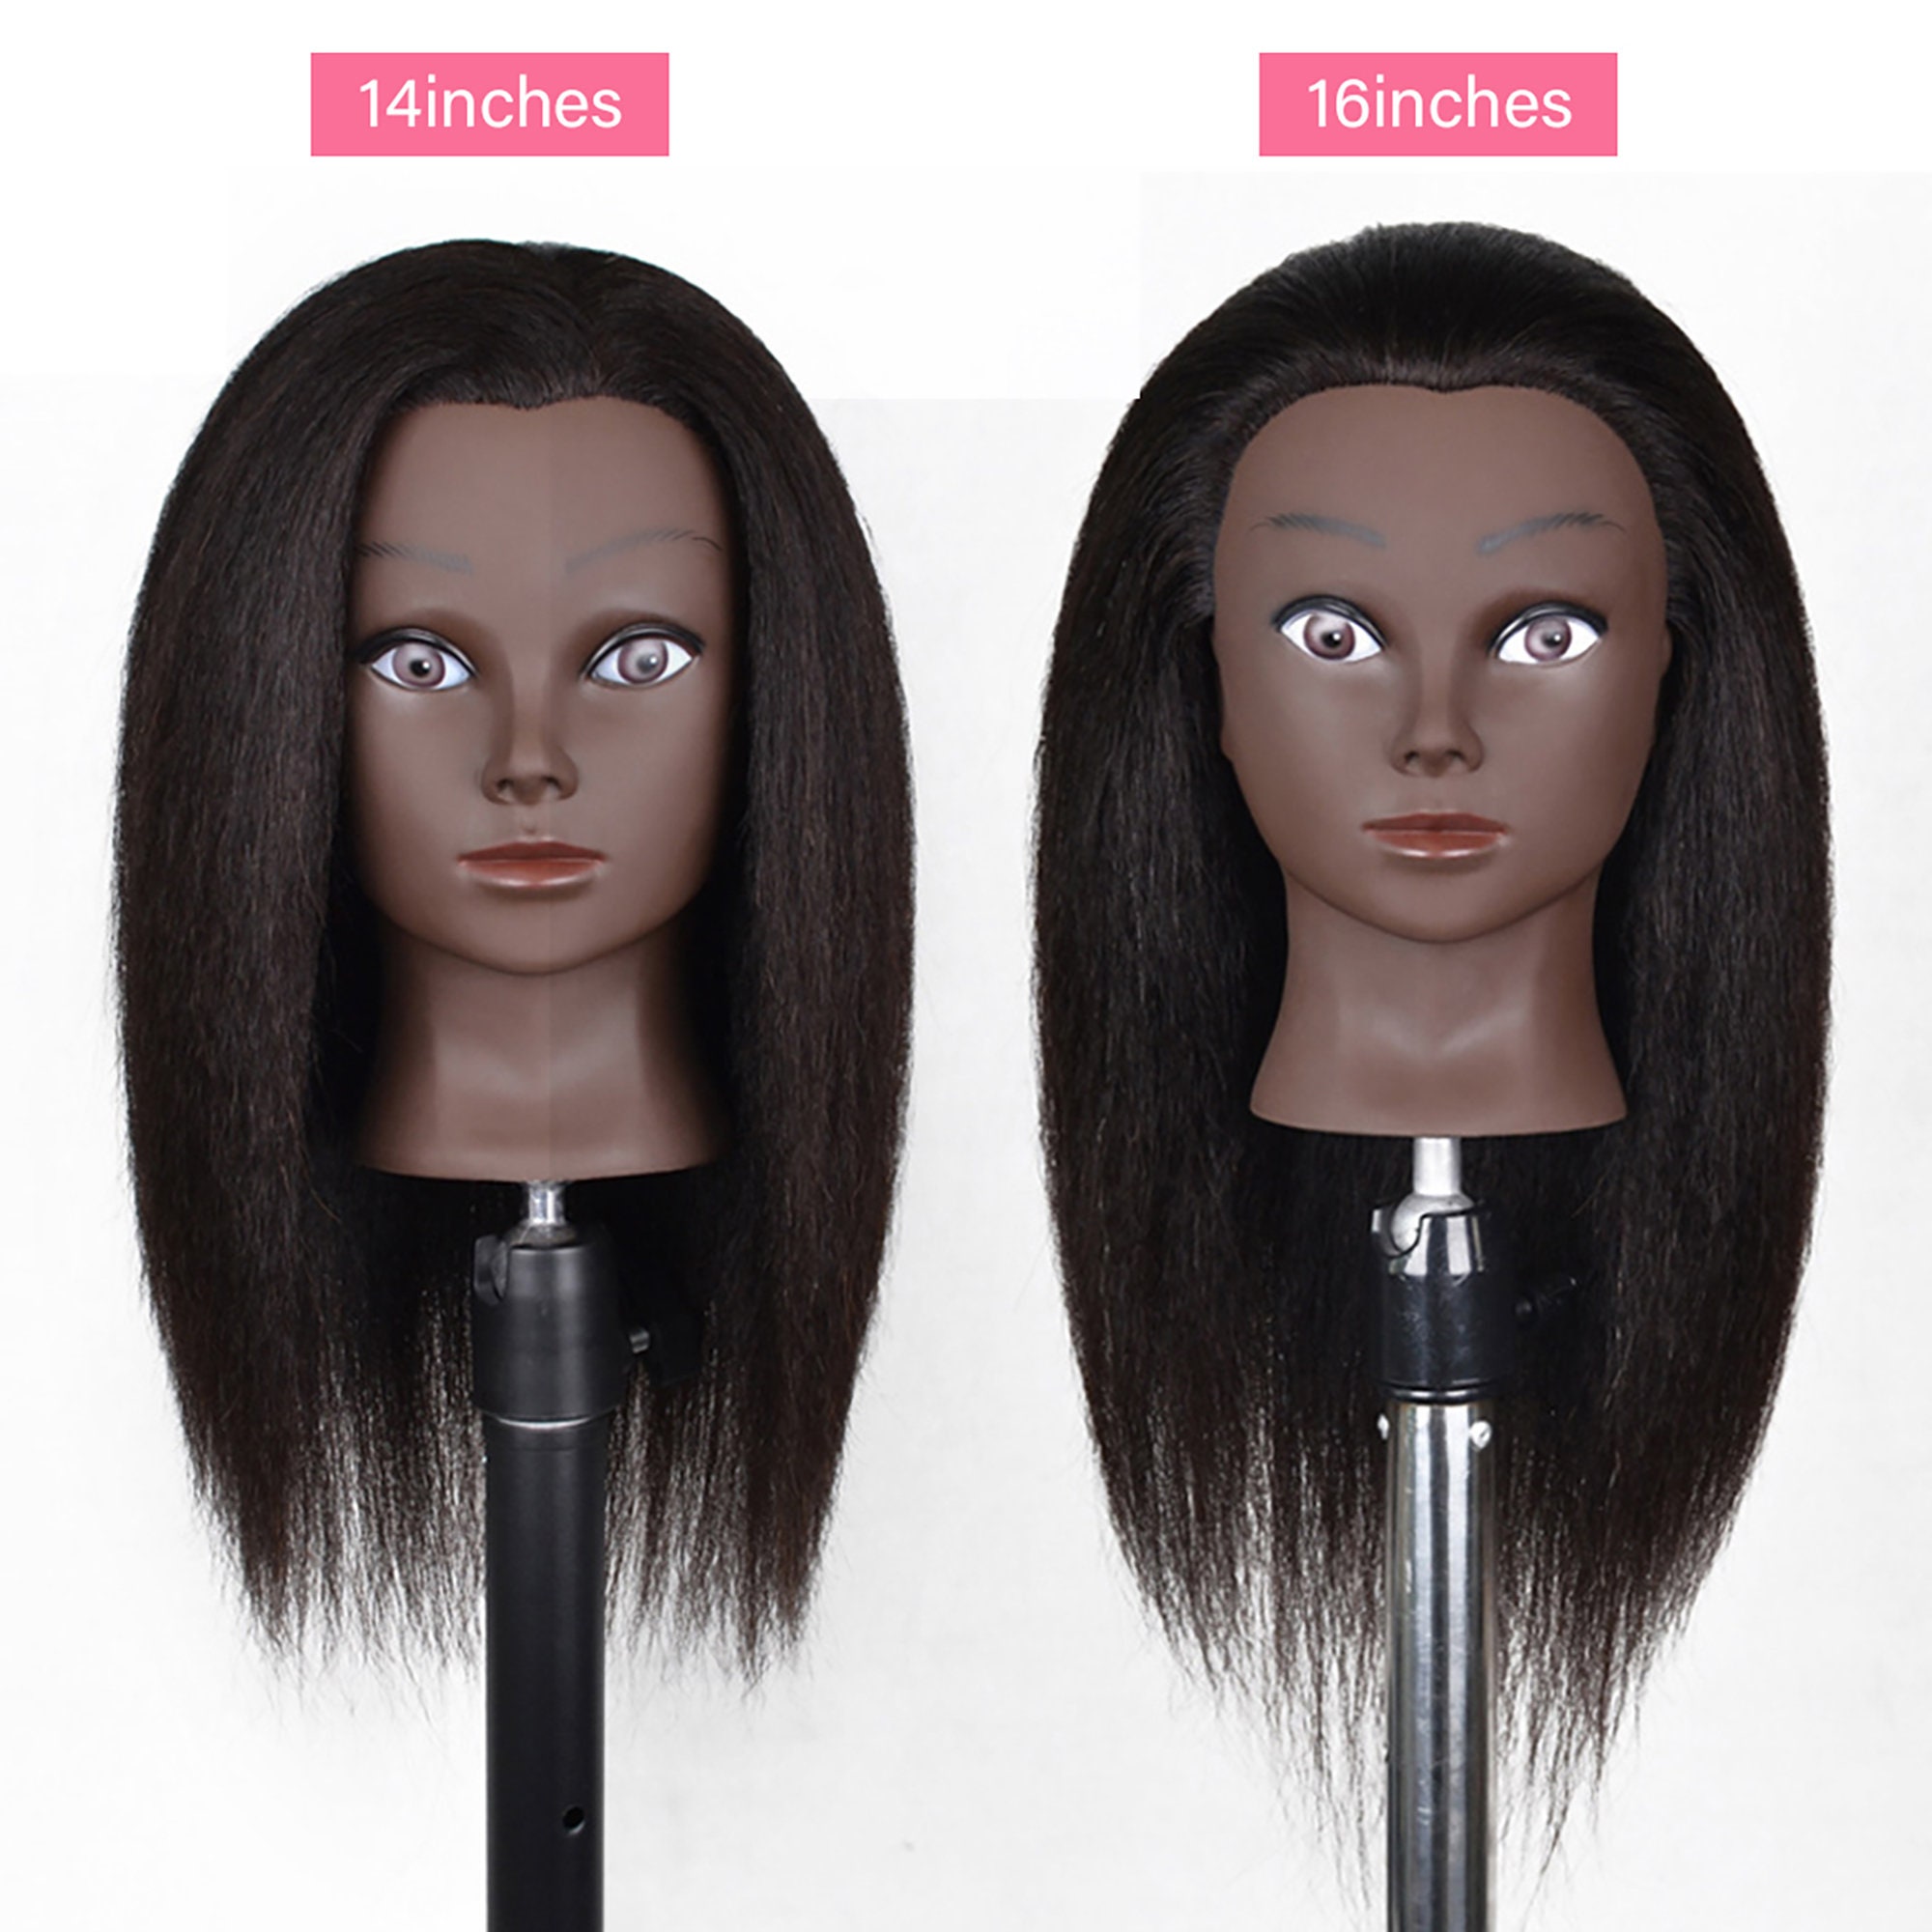 Mannequin Head 100% Human Hair Manikin Head Styling Hairdresser Training  Head Cosmetology Doll Head for Hairstyling and Braid 